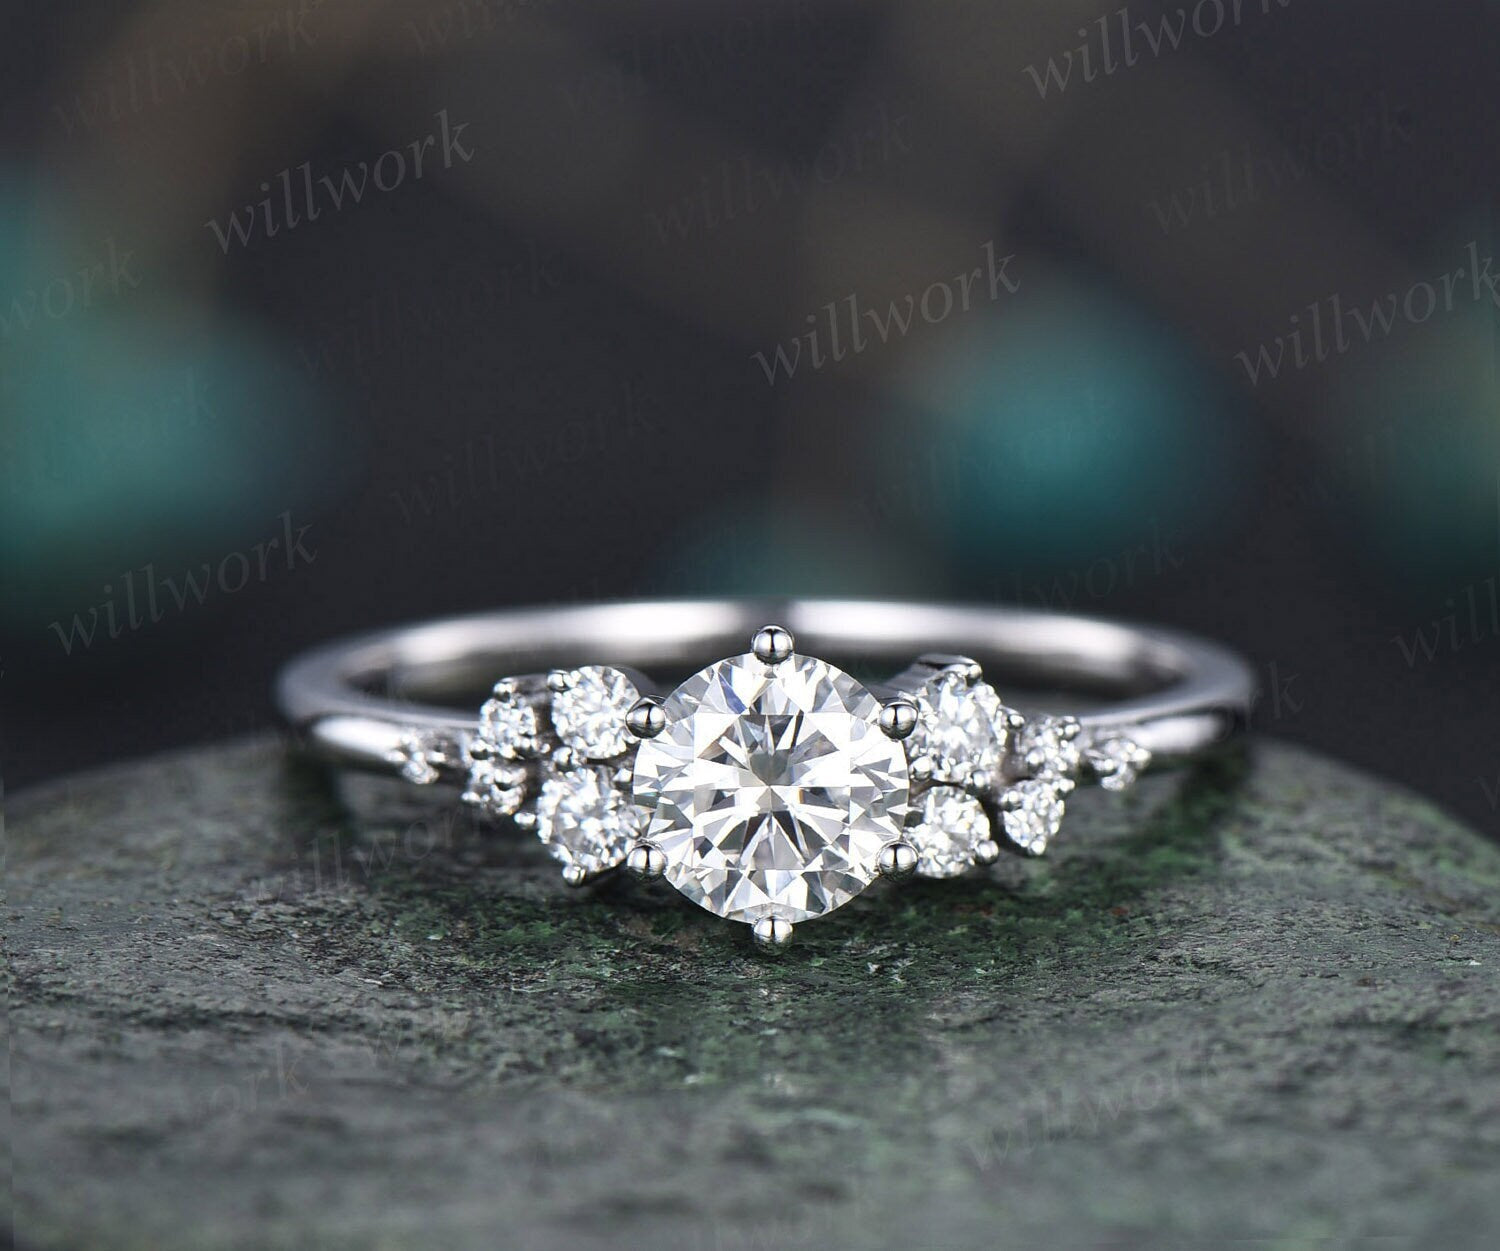 3.5 Ct Diamond Hidden Halo Engagement Ring in 14K White Gold Oval Cut Lab  Grown | eBay